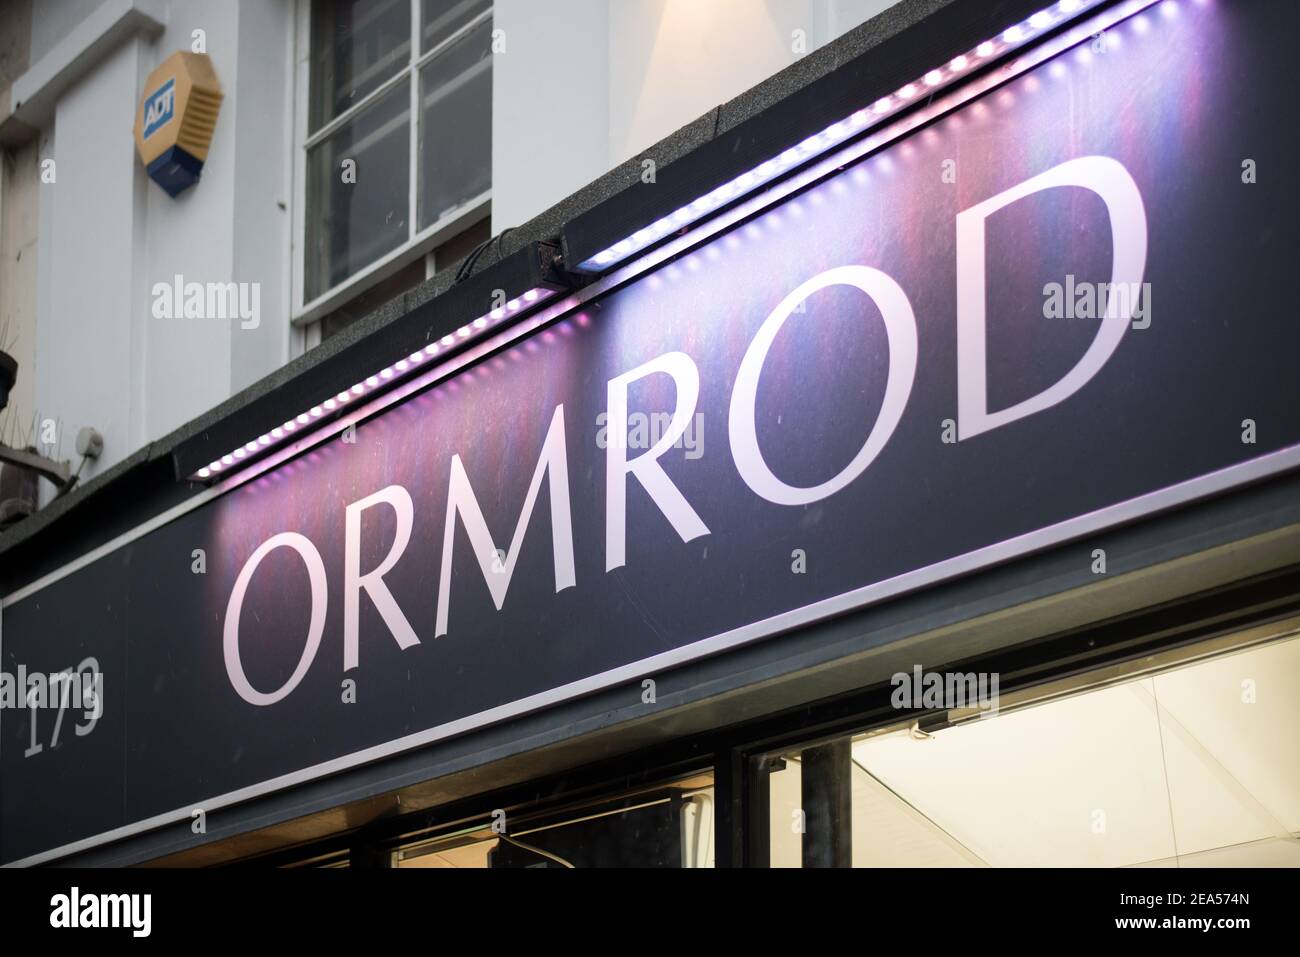 Logo Shop Sign Store Brand Front Retail Retailer Lighting Shop Ormrod, 173 Chiswick High Road, Chiswick, London W4 2DR Stock Photo